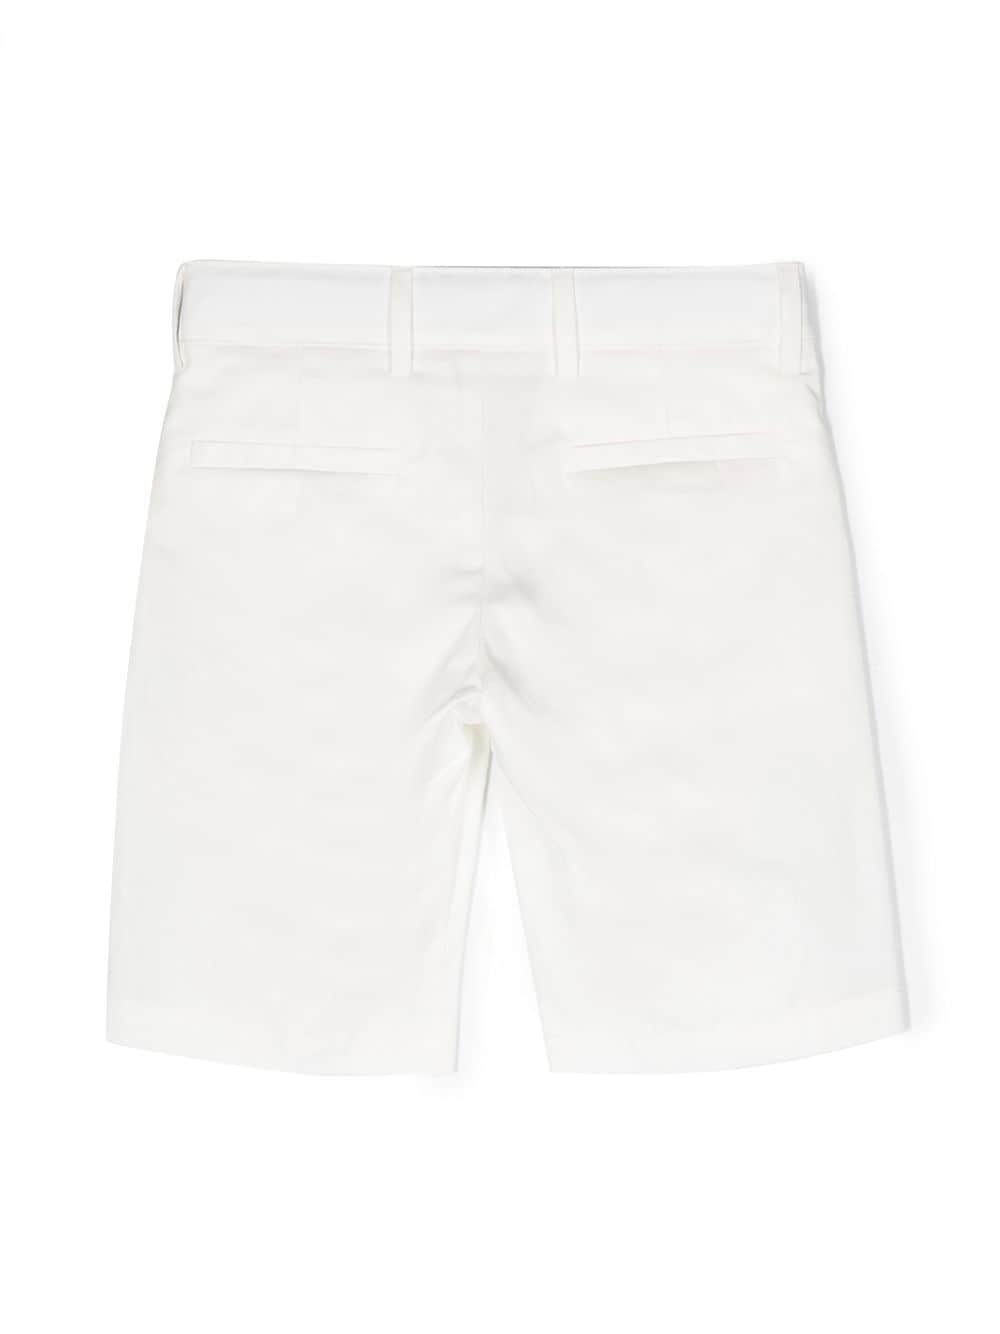 Shorts formale